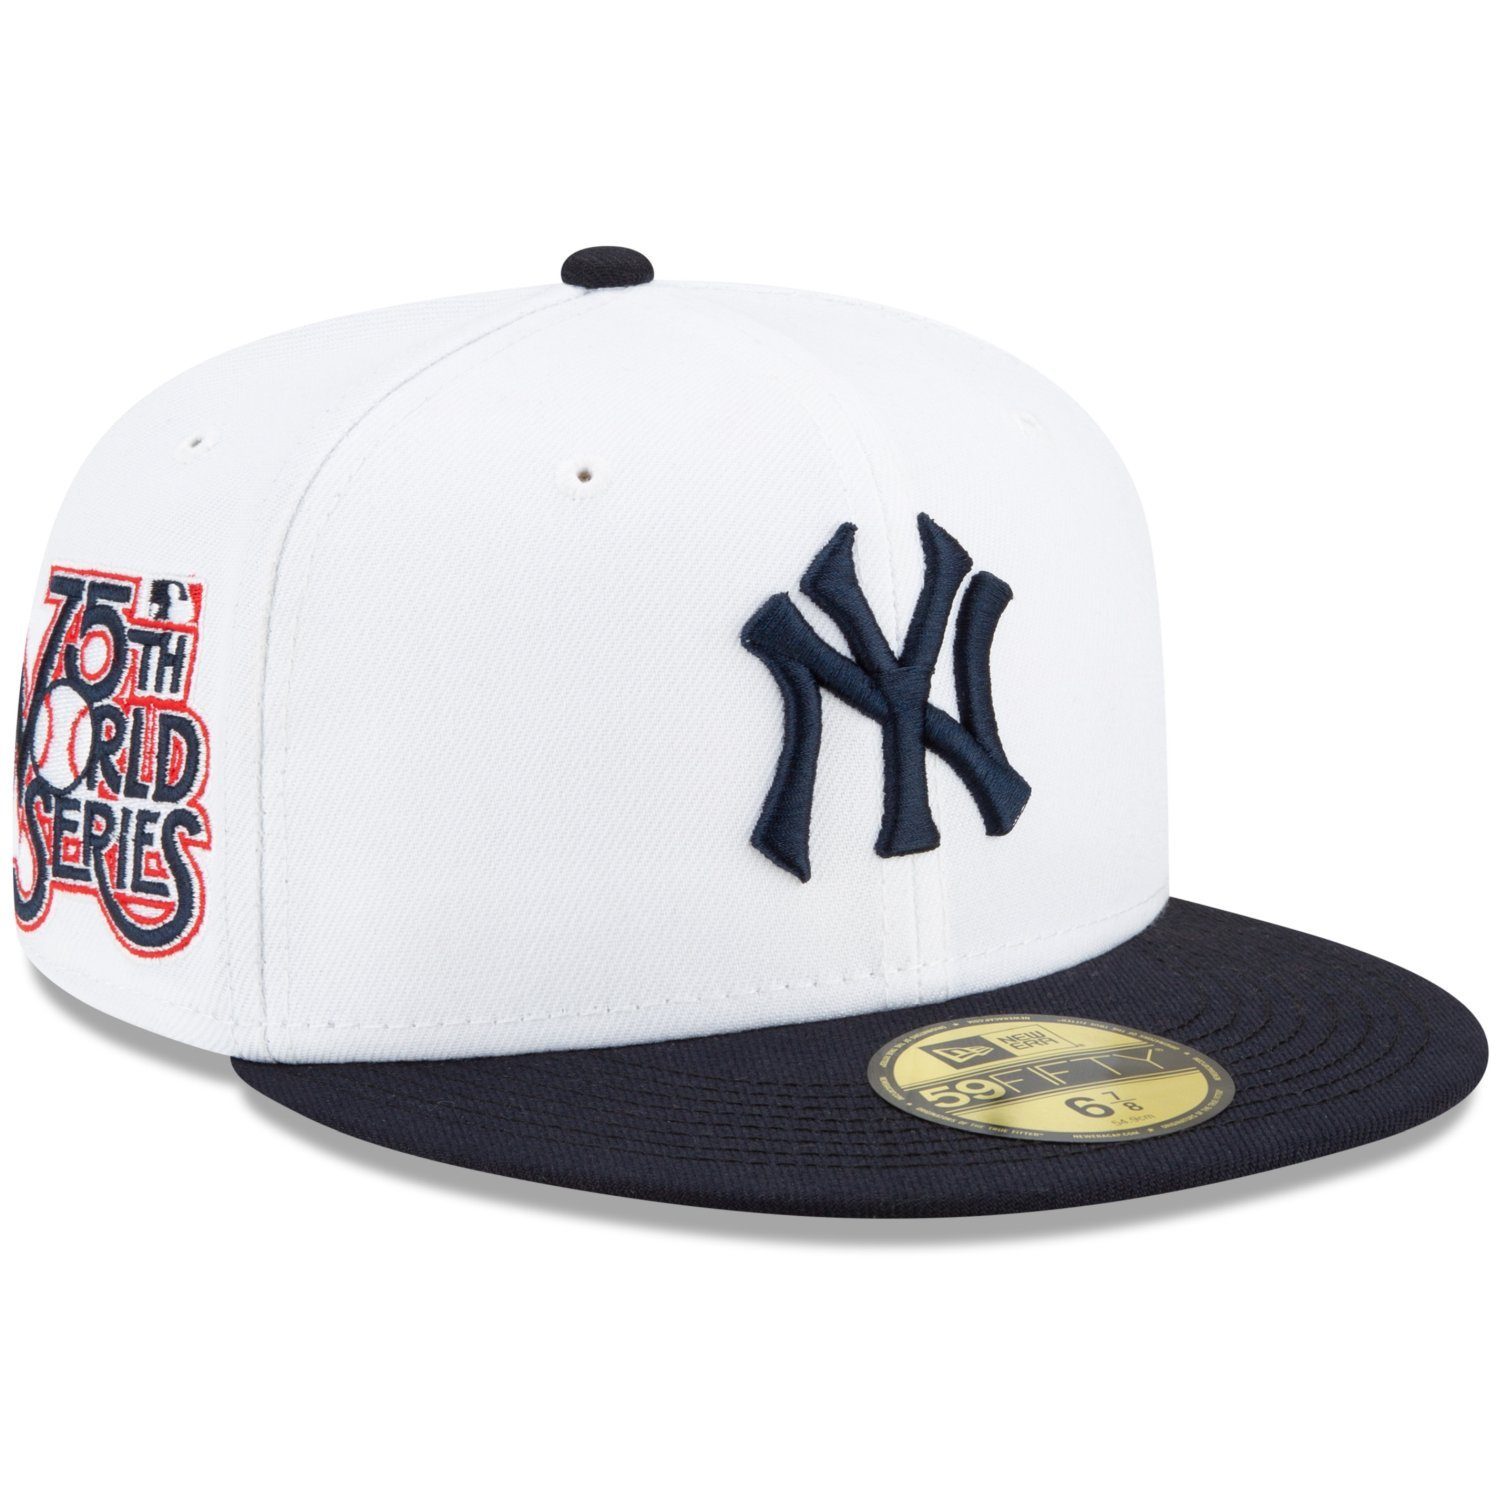 New Era Fitted Cap 59Fifty WORLD SERIES 1975 NY Yankees | Fitted Caps